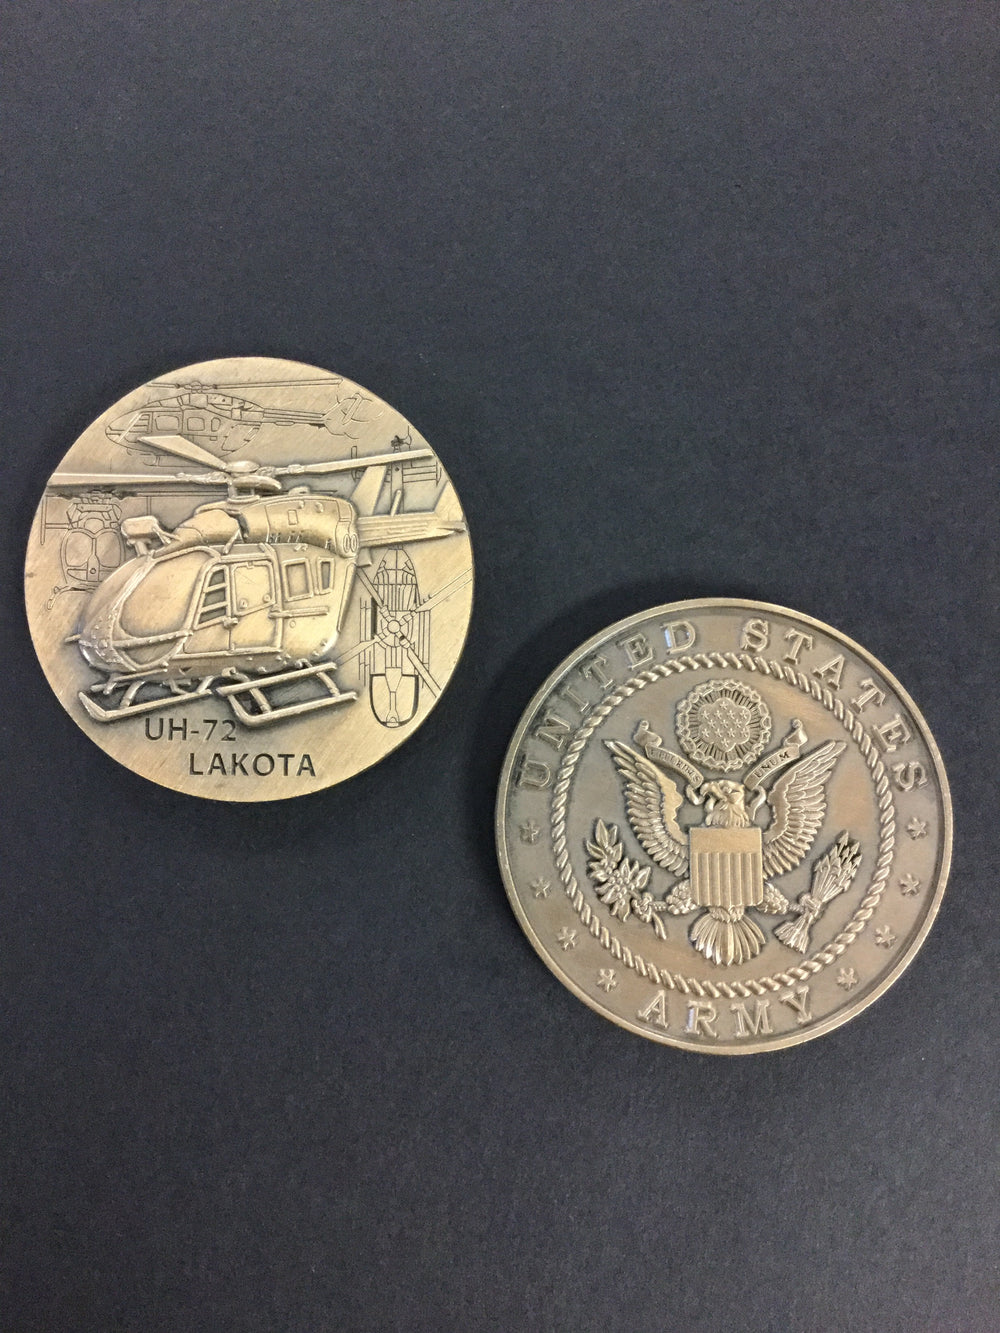 UH-72 Lakota Helicopter Coin